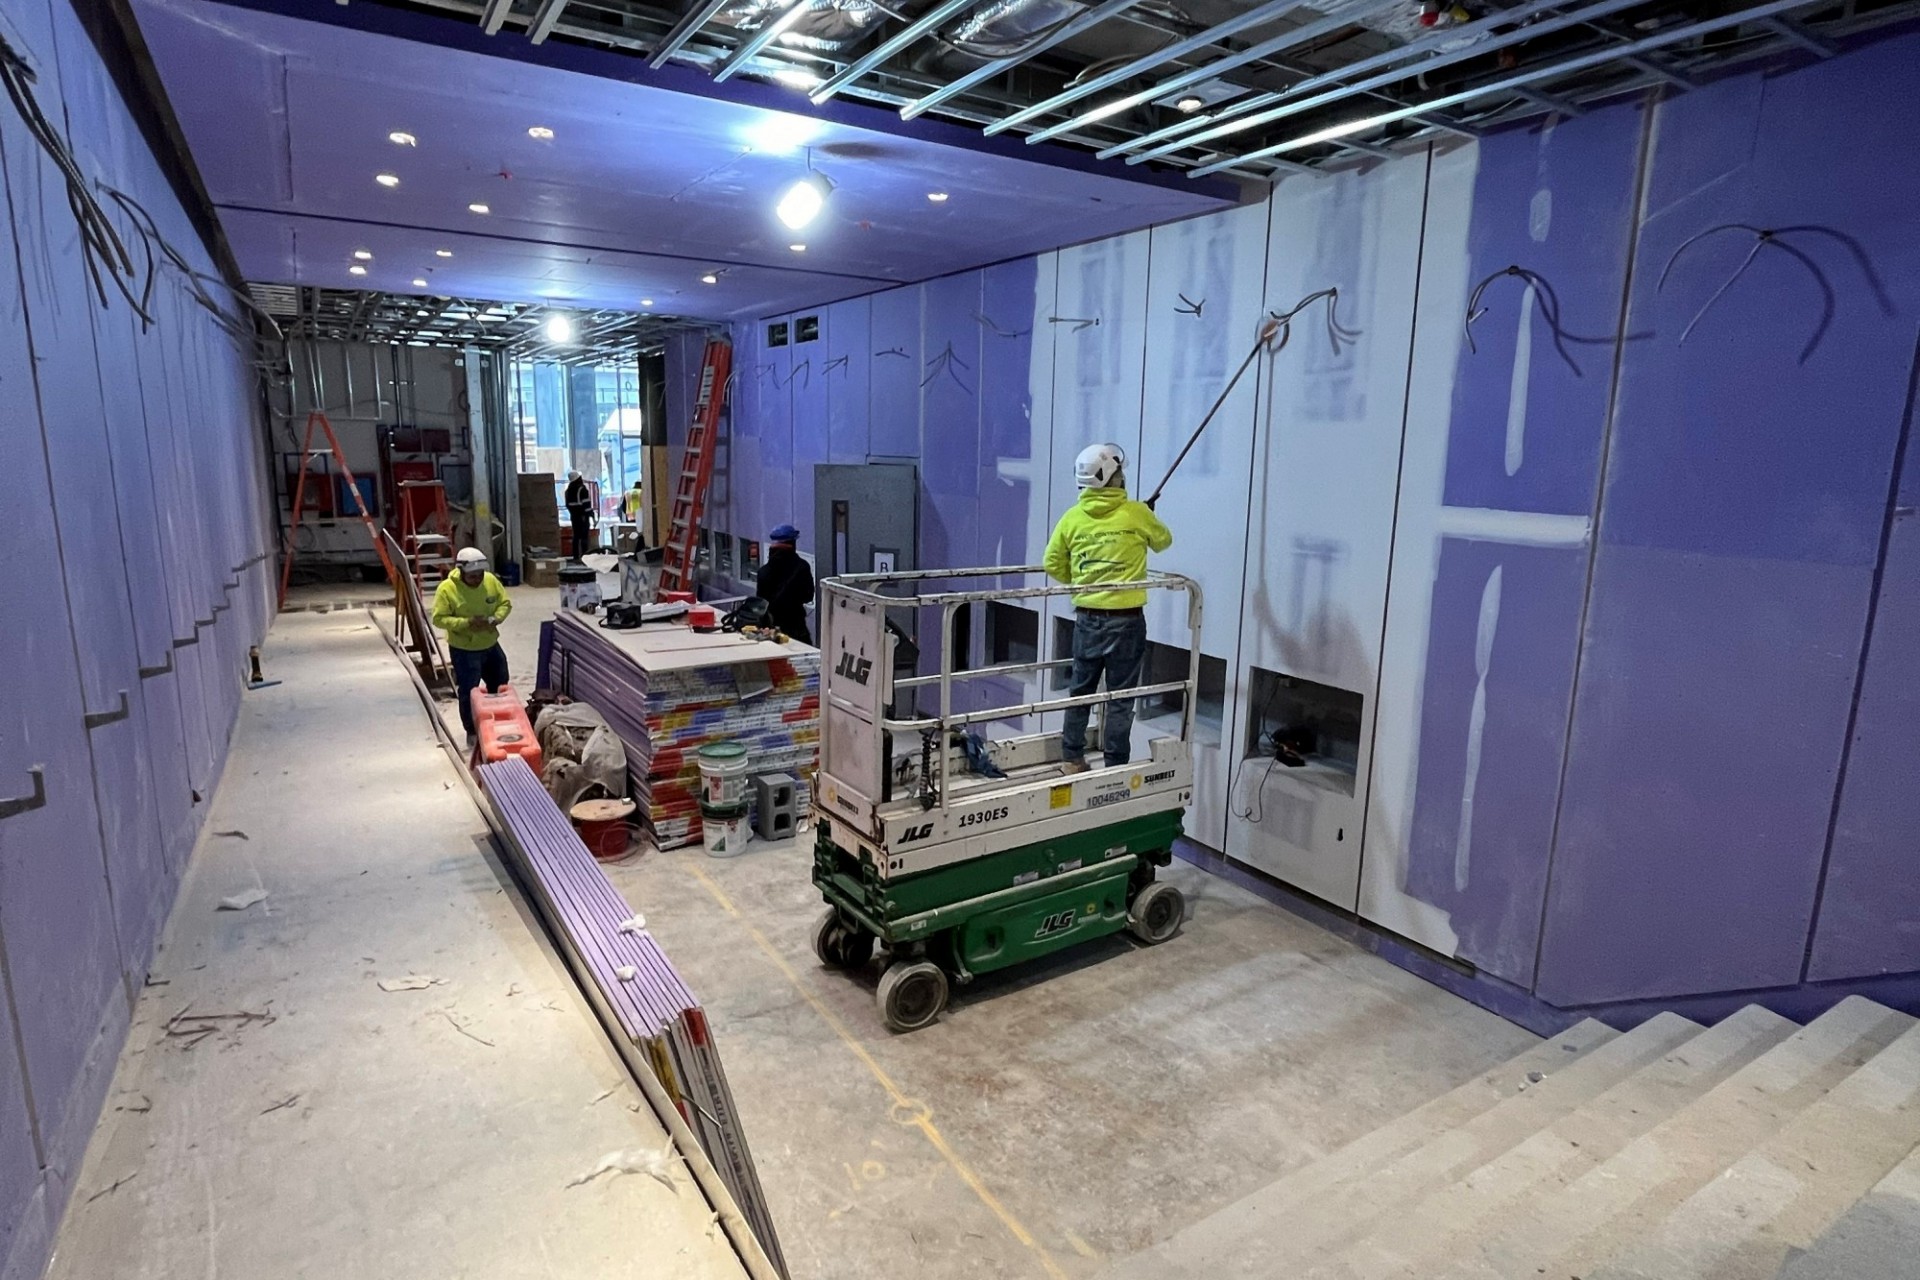 Construction of the interior of the lobby of 600 W. 125th Street with drywall being installed.